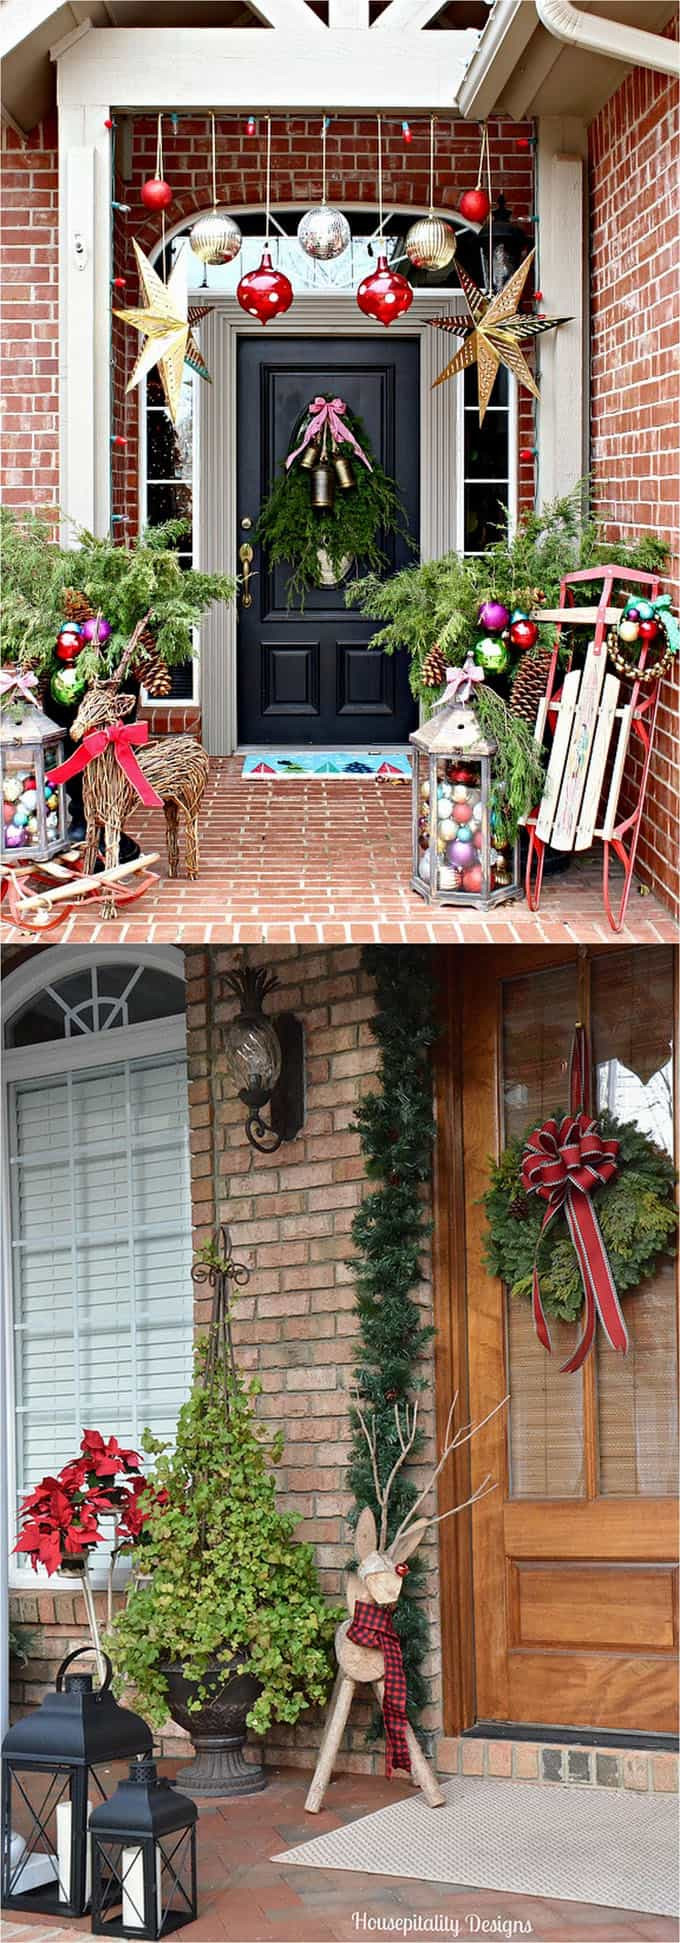 Christmas Outdoor Decorations Ideas
 Gorgeous Outdoor Christmas Decorations 32 Best Ideas